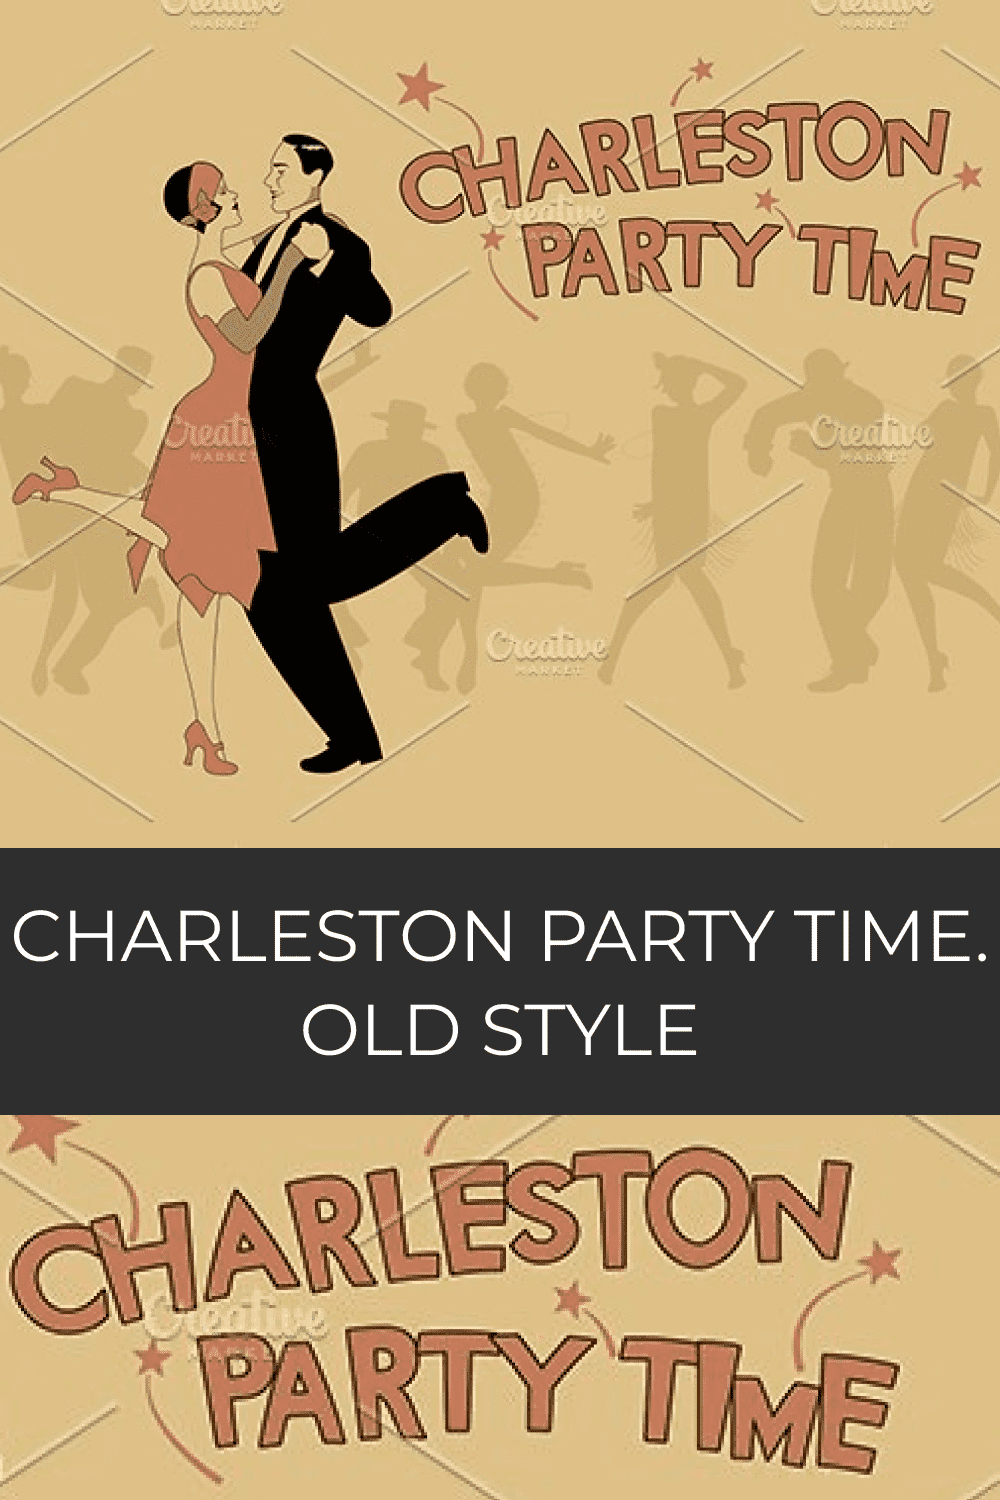 charleston party time. old style pinterest image.